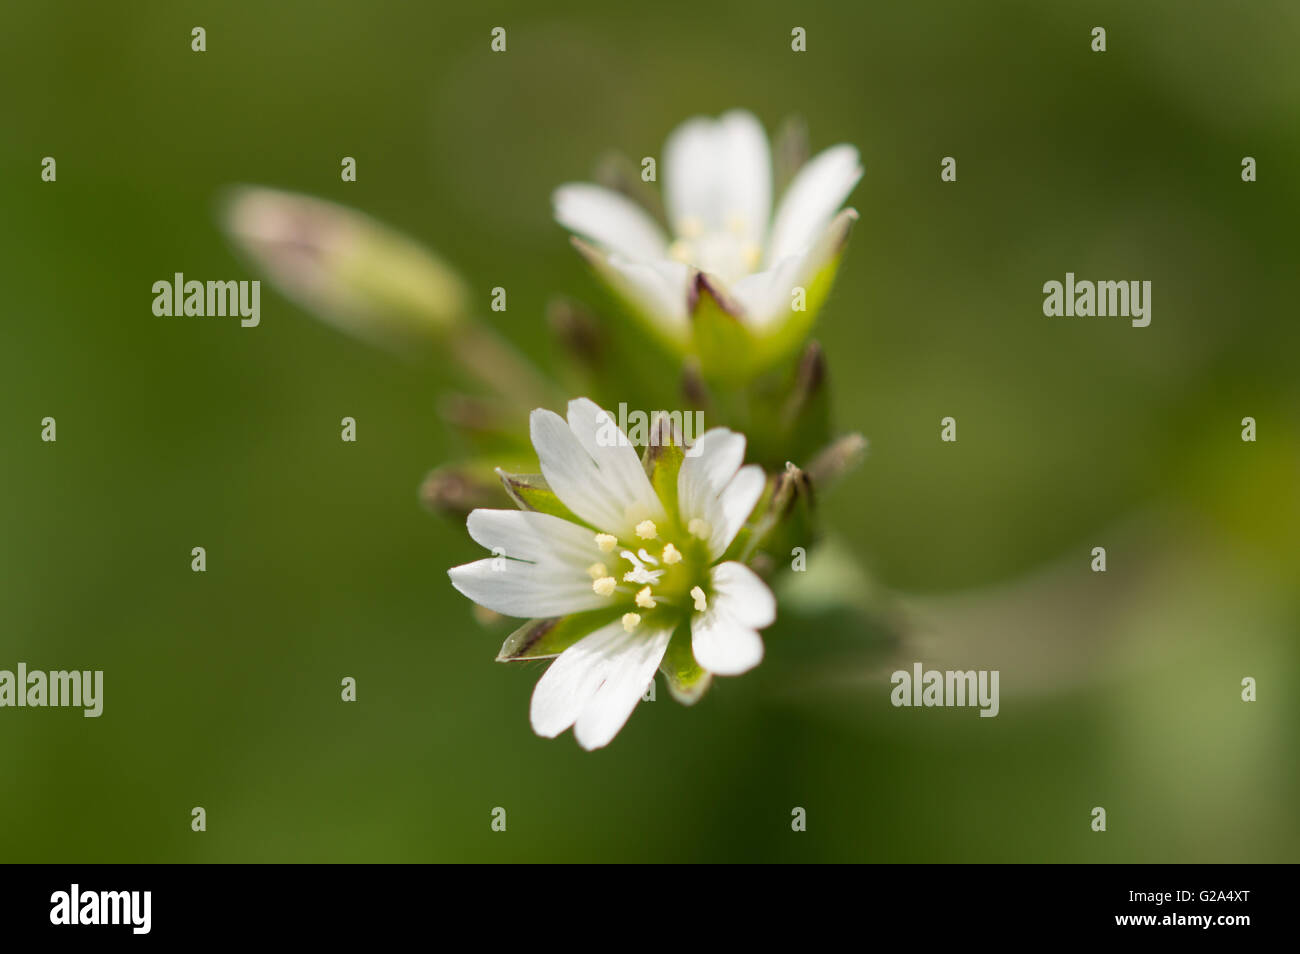 A close-up of Mouse-ear Chickweed (Cerastium fontanum) flowers. Stock Photo